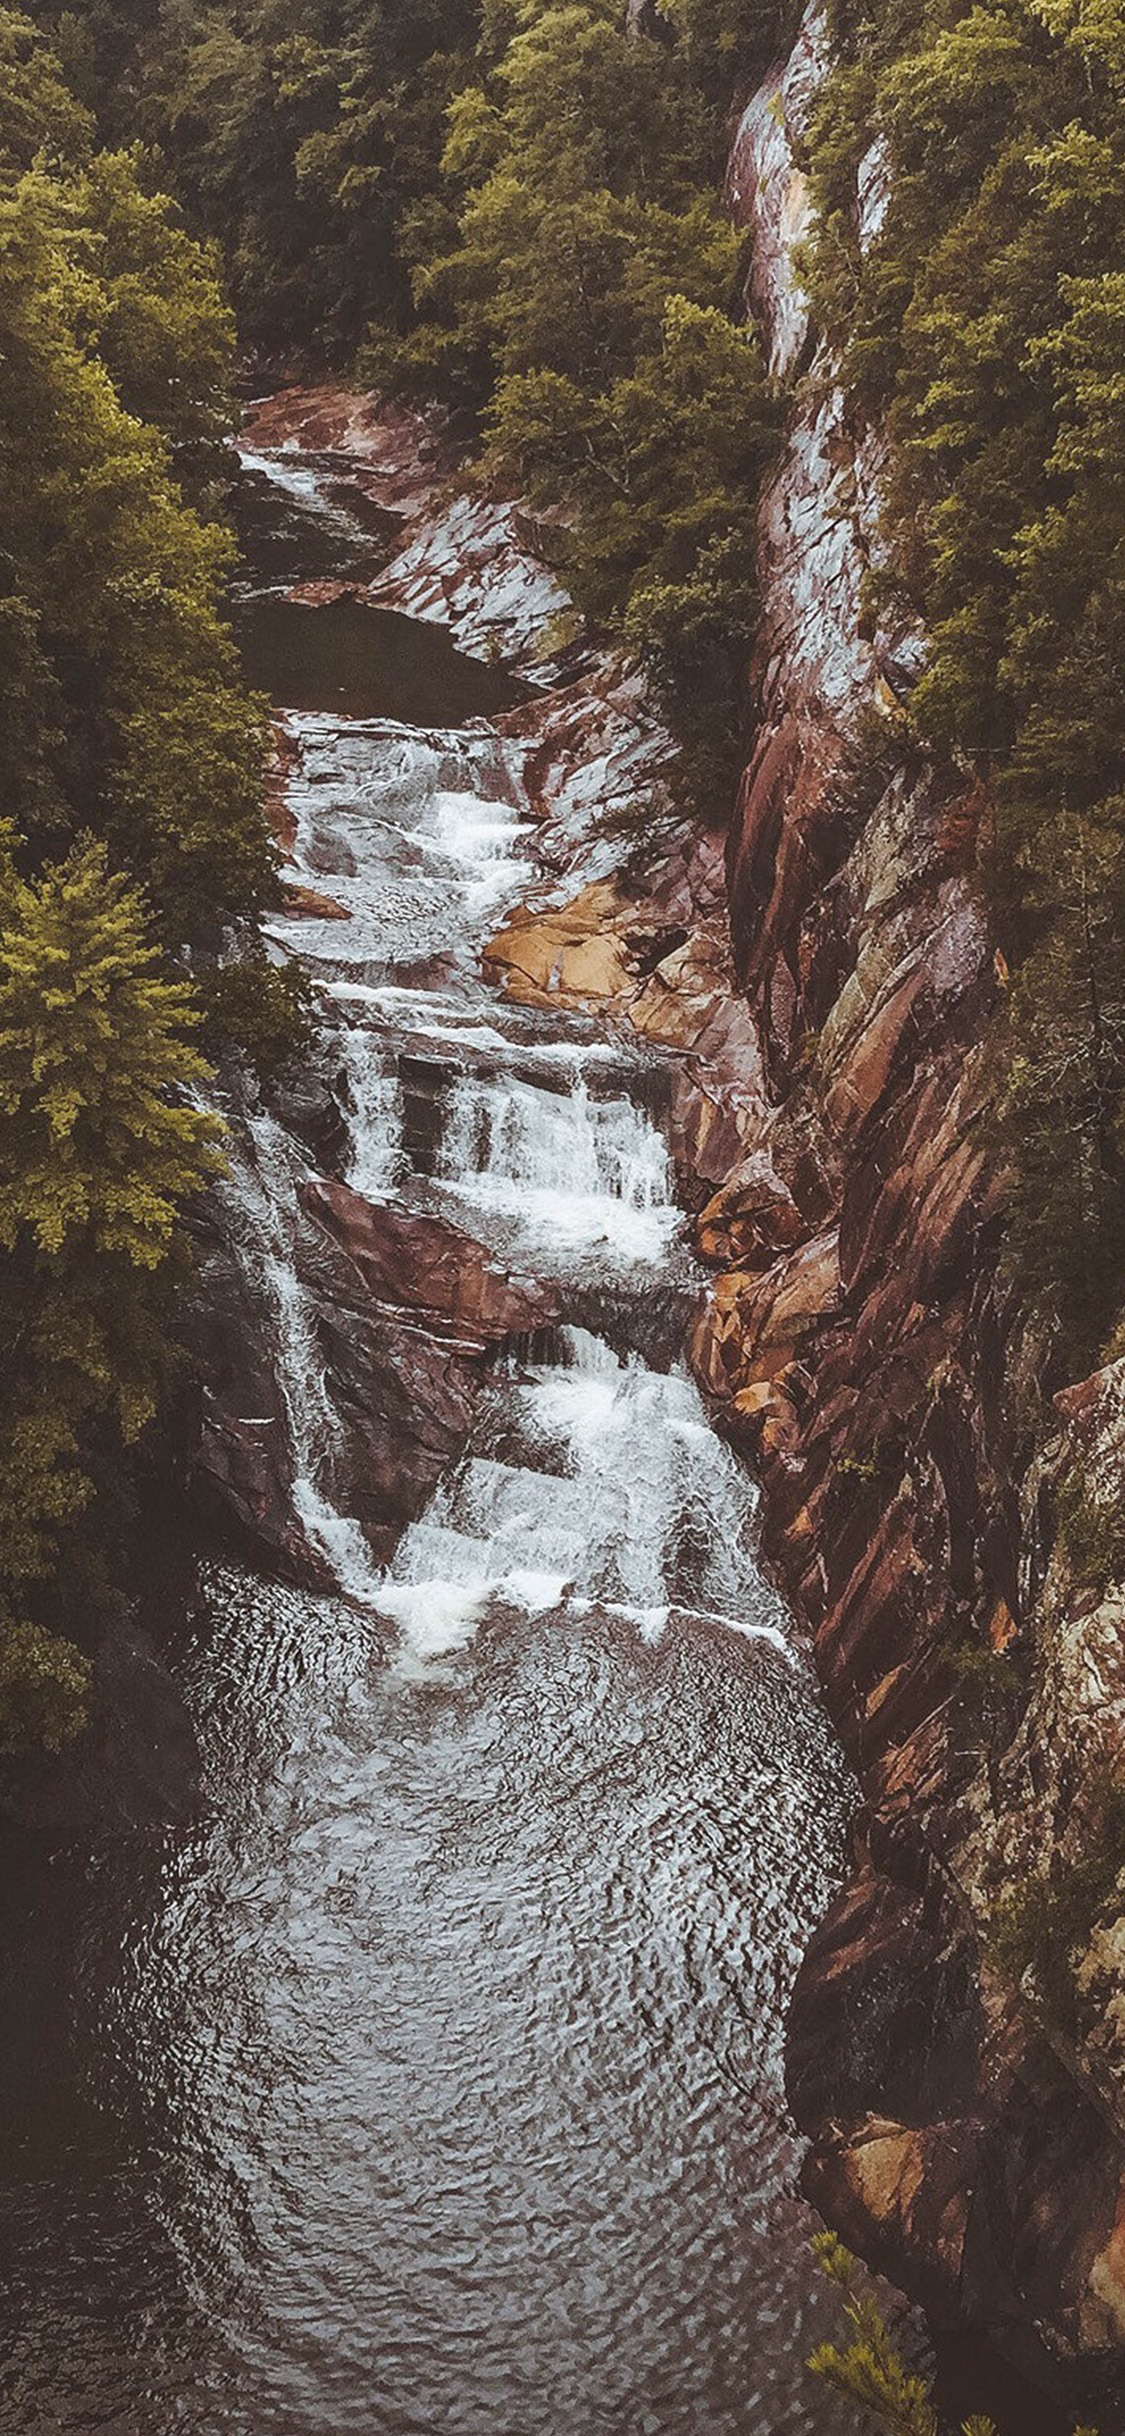 iPhone X wallpaper. mountain fall forest nature